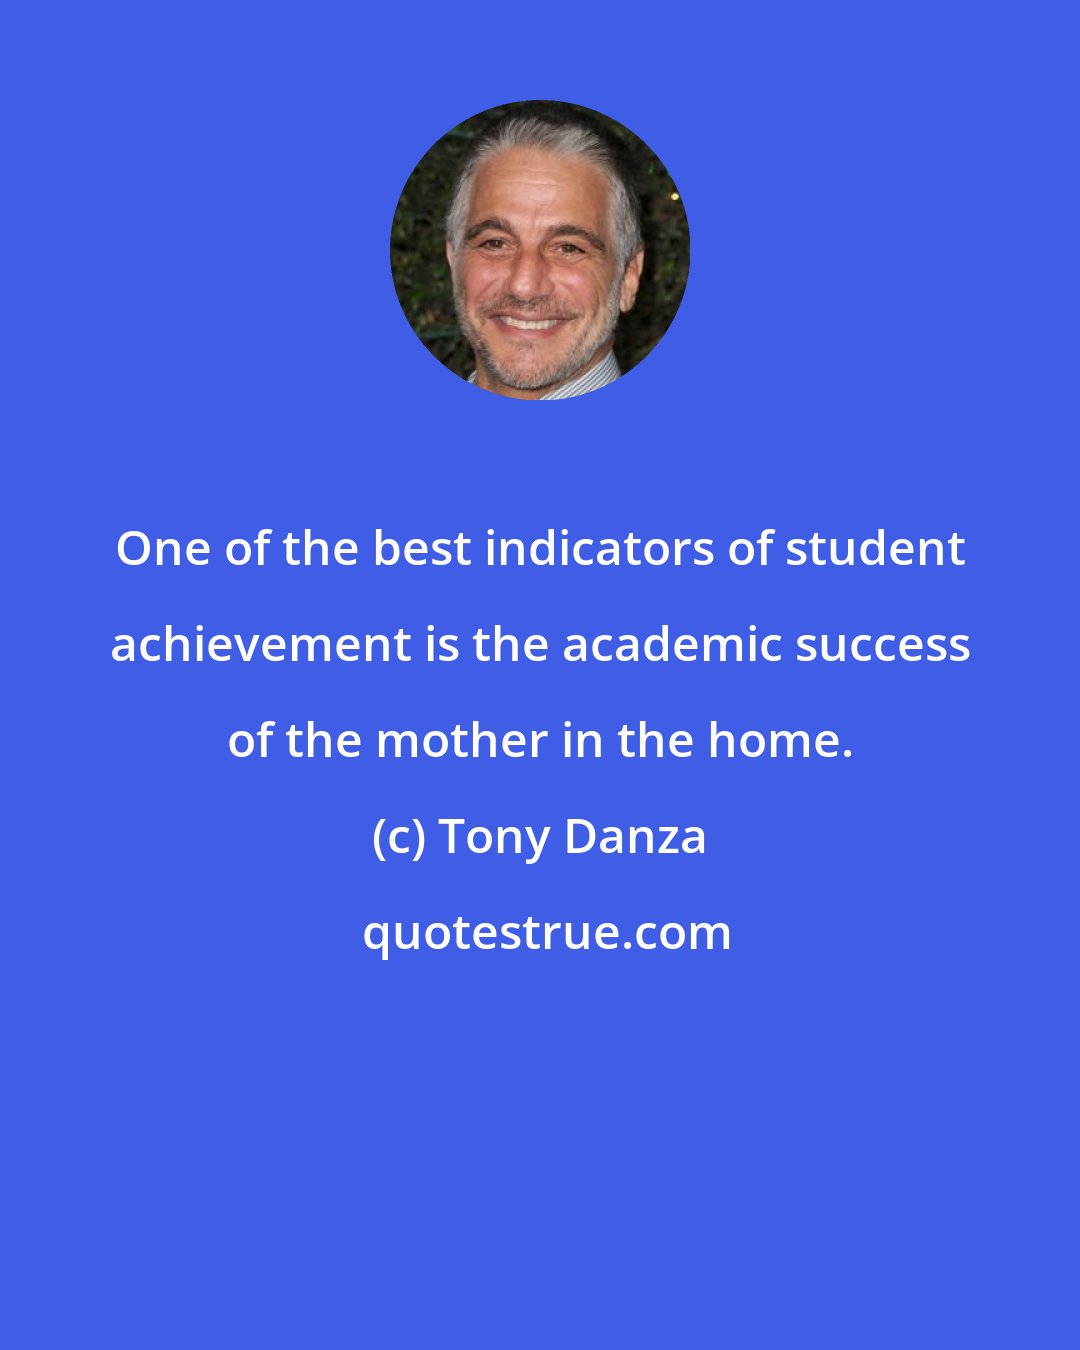 Tony Danza: One of the best indicators of student achievement is the academic success of the mother in the home.